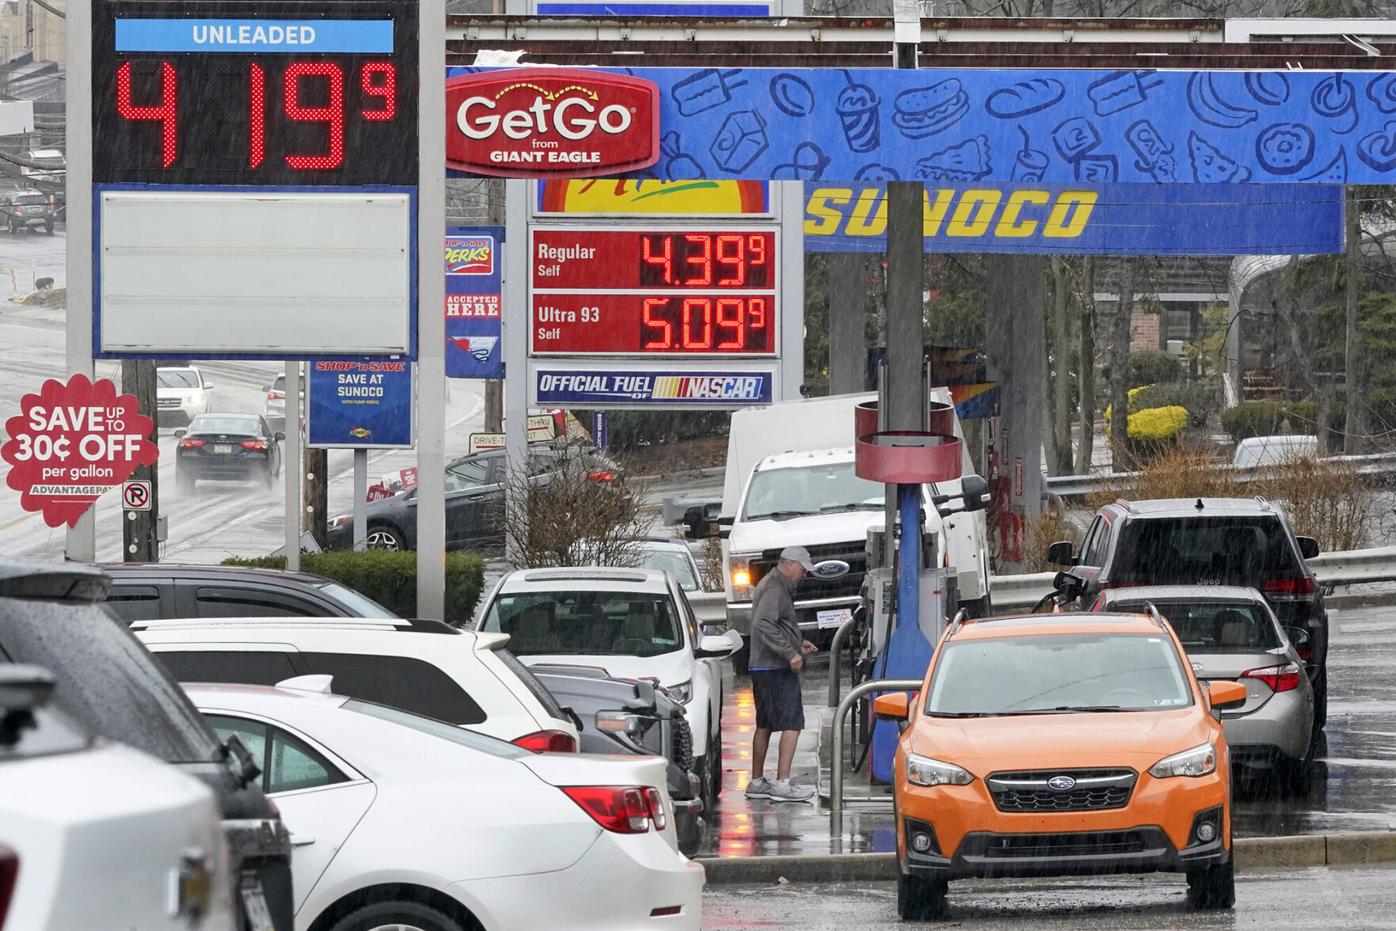 See those cheaper gas prices at GetGo? Here's how to get that